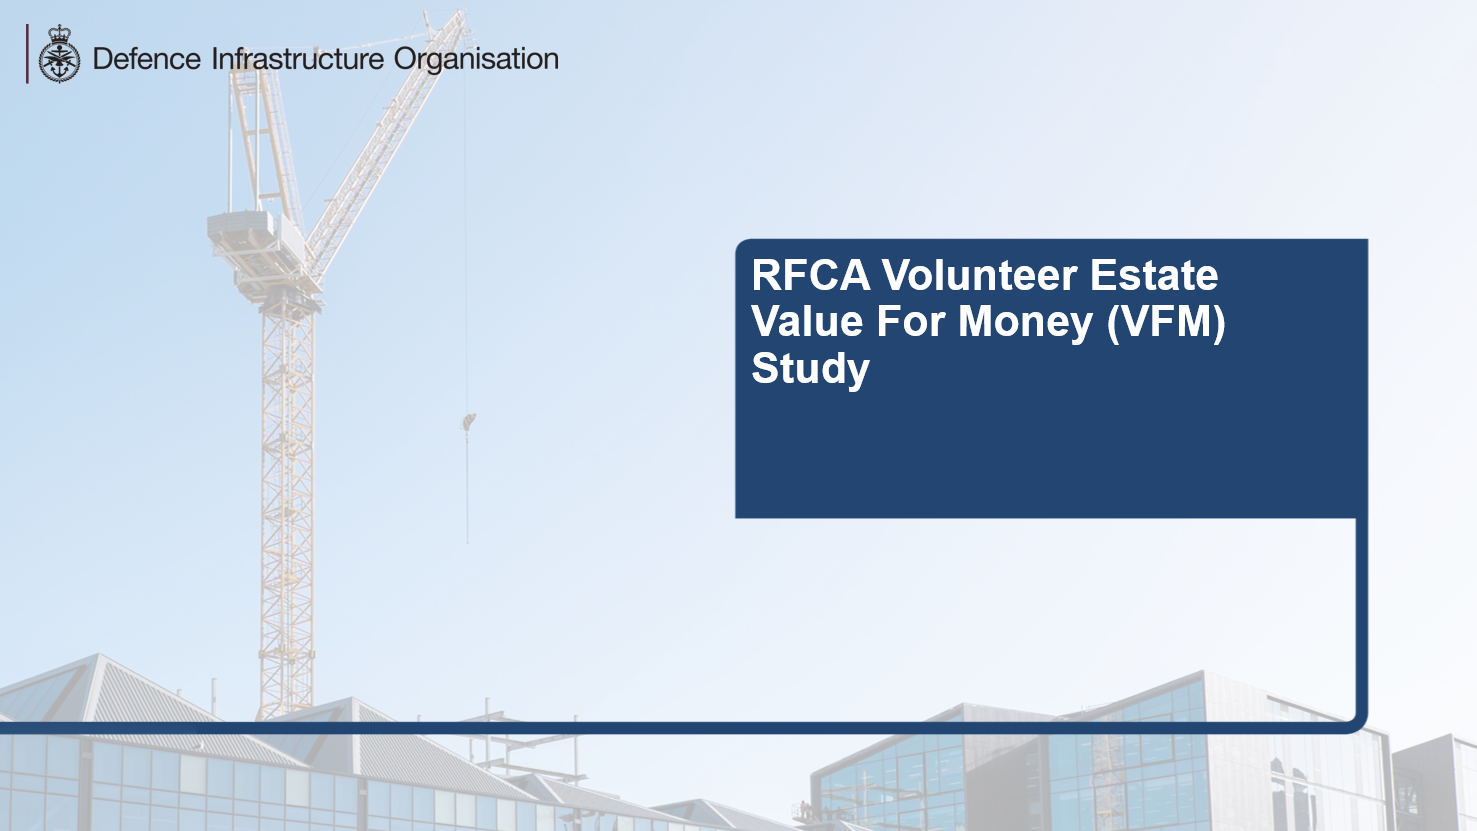 Full 187 page Volunteer Estate Value for Money study report published